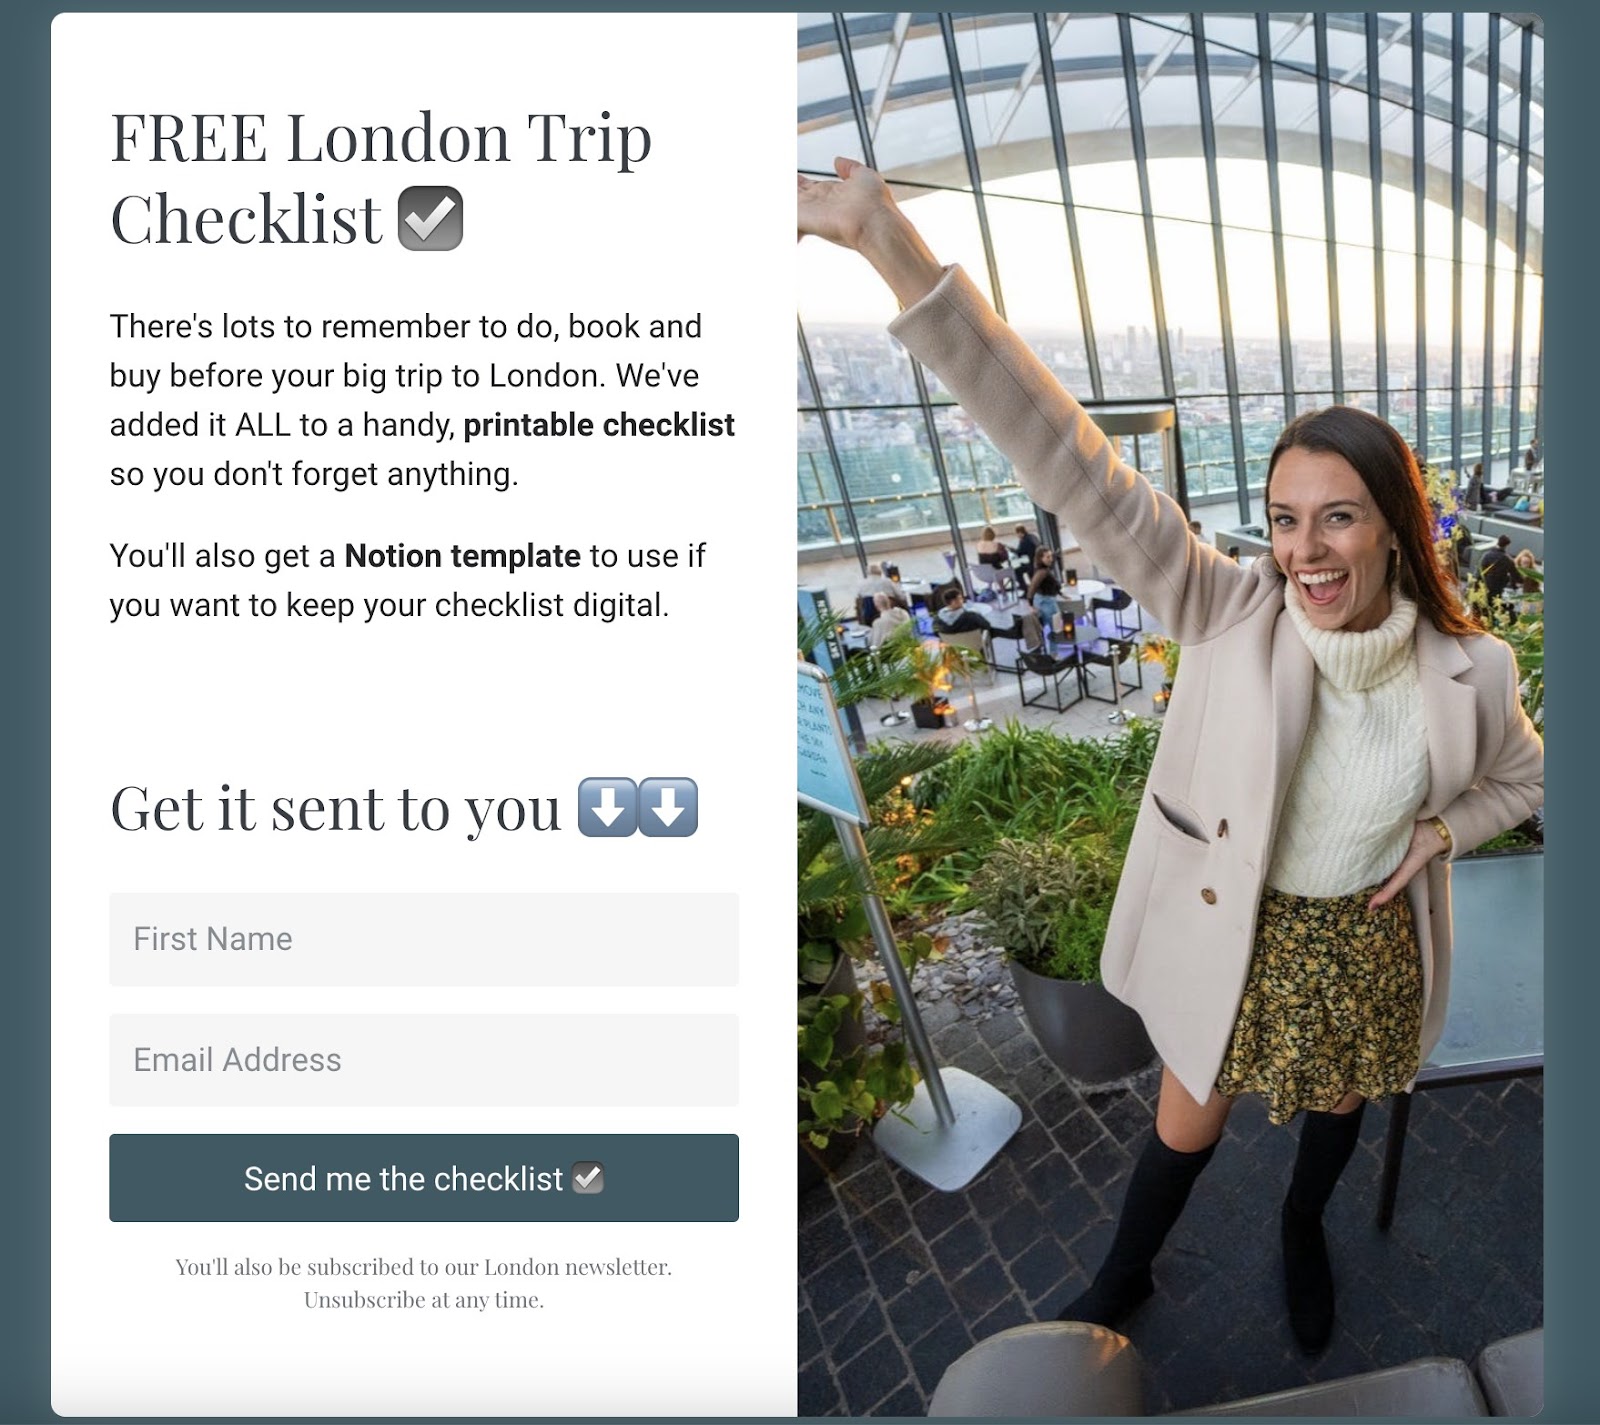 Love and London's free travel checklist form